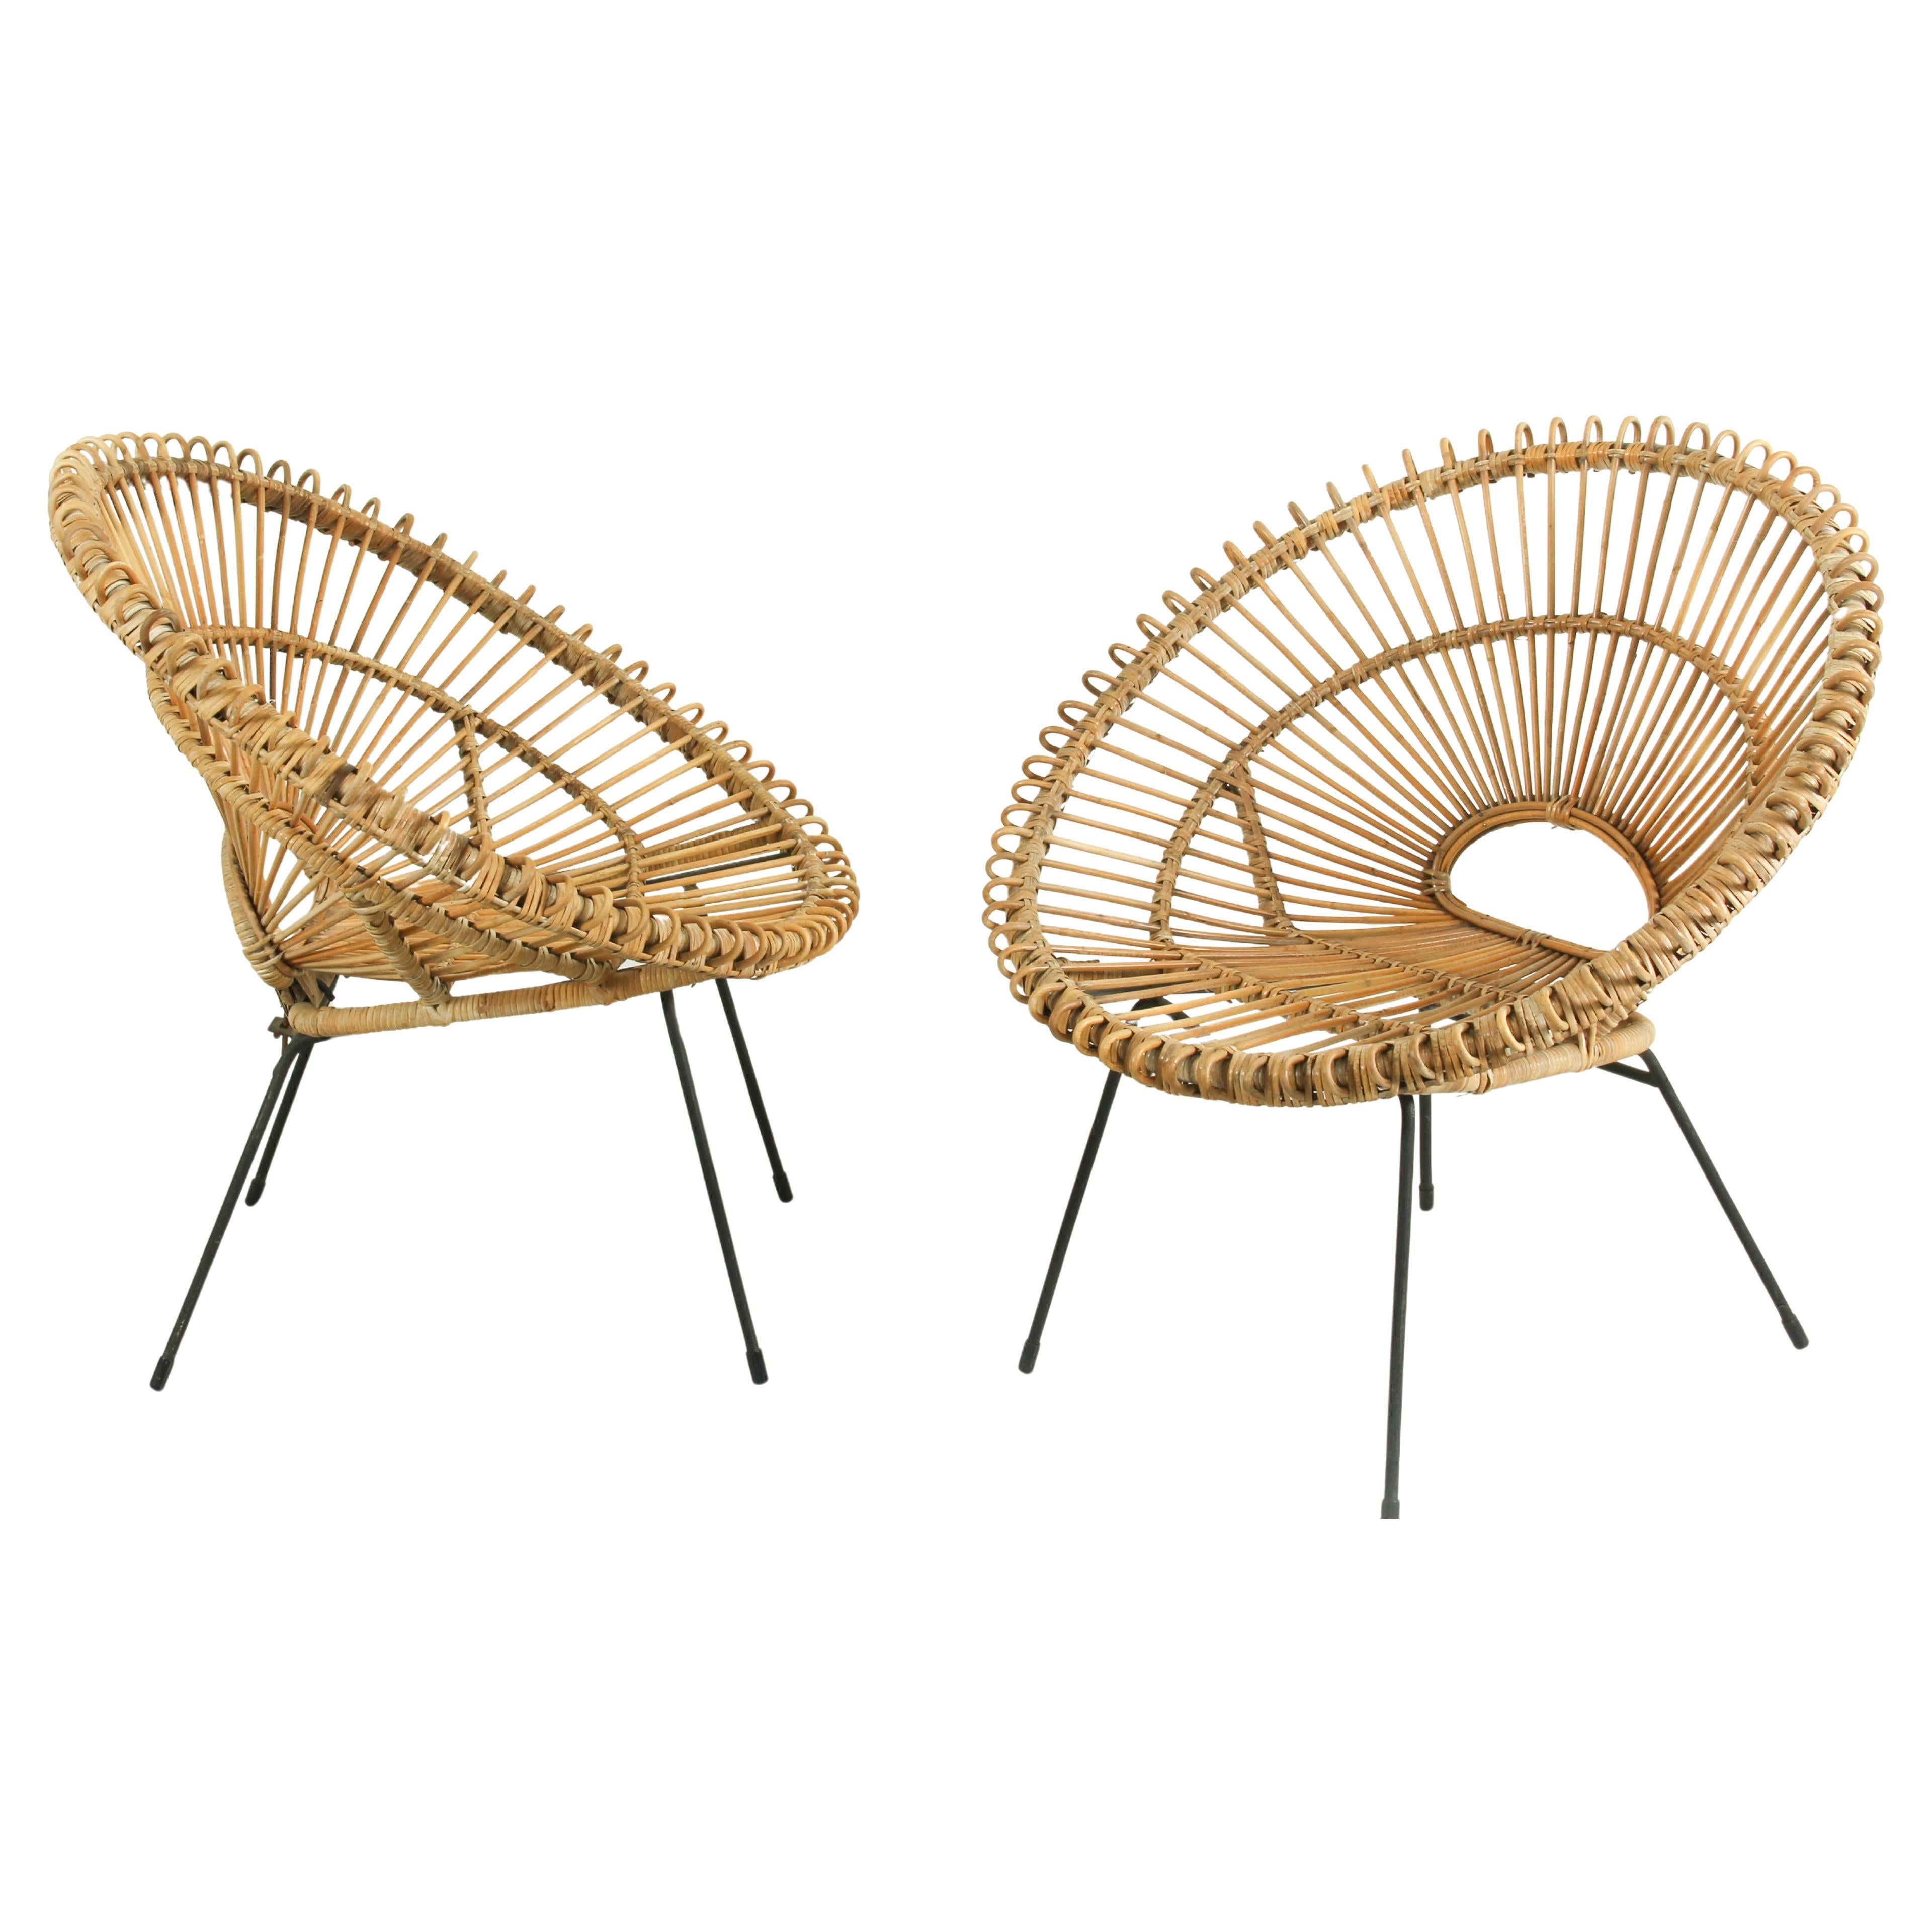 Set of 2 sunburst chairs by Rohe Noordwolde, 1950s.